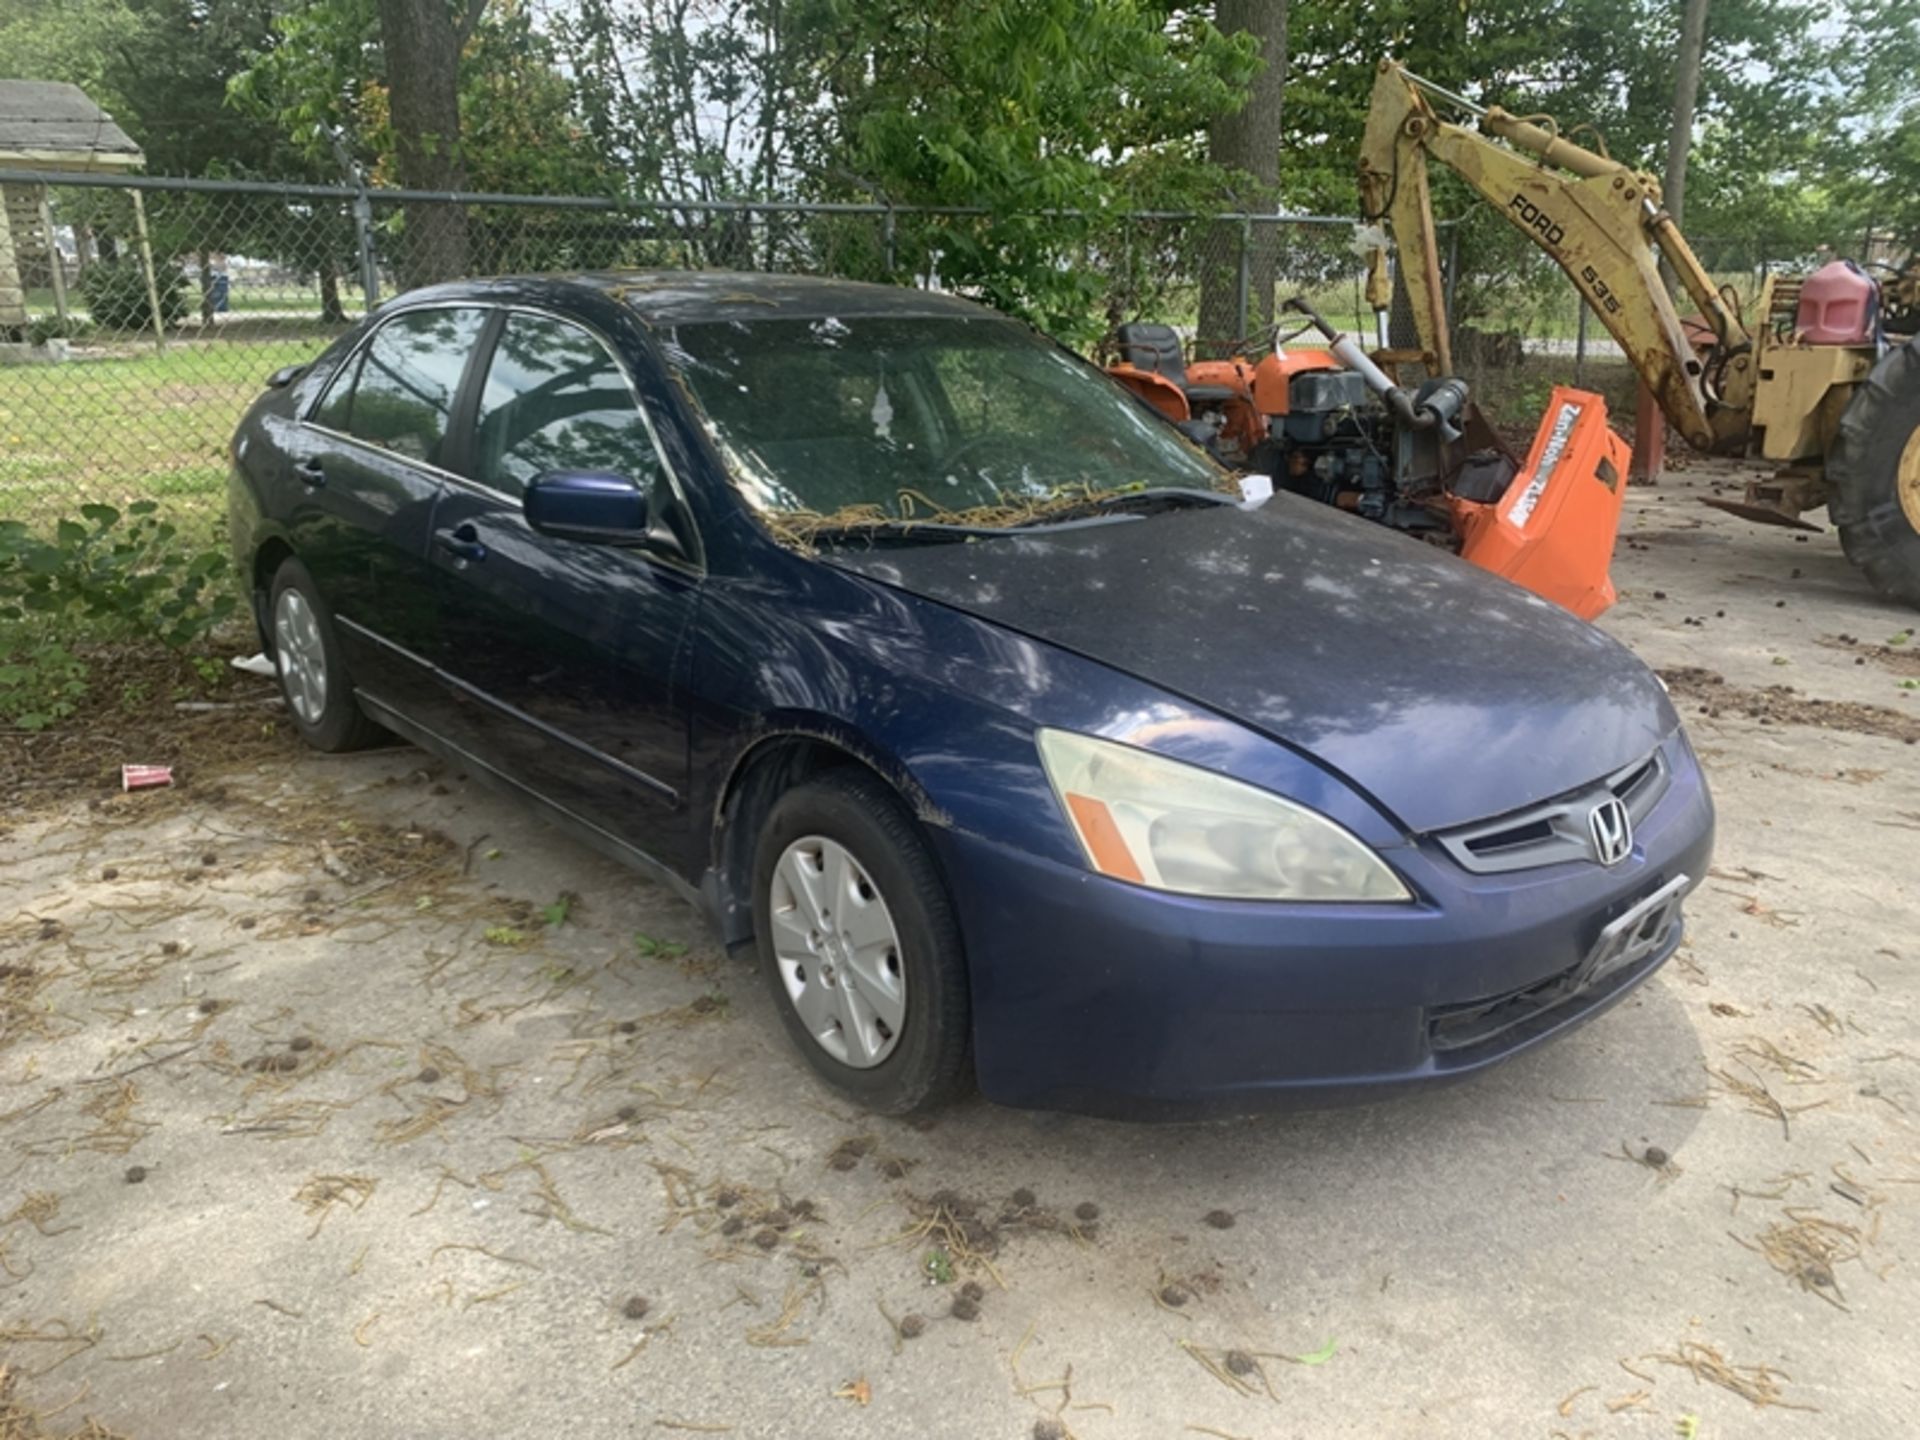 2003 HONDA Accord - 274,715 miles showing - 1HGCM56343A125972 (NOT RUNNING) Vehicle will not - Image 2 of 6